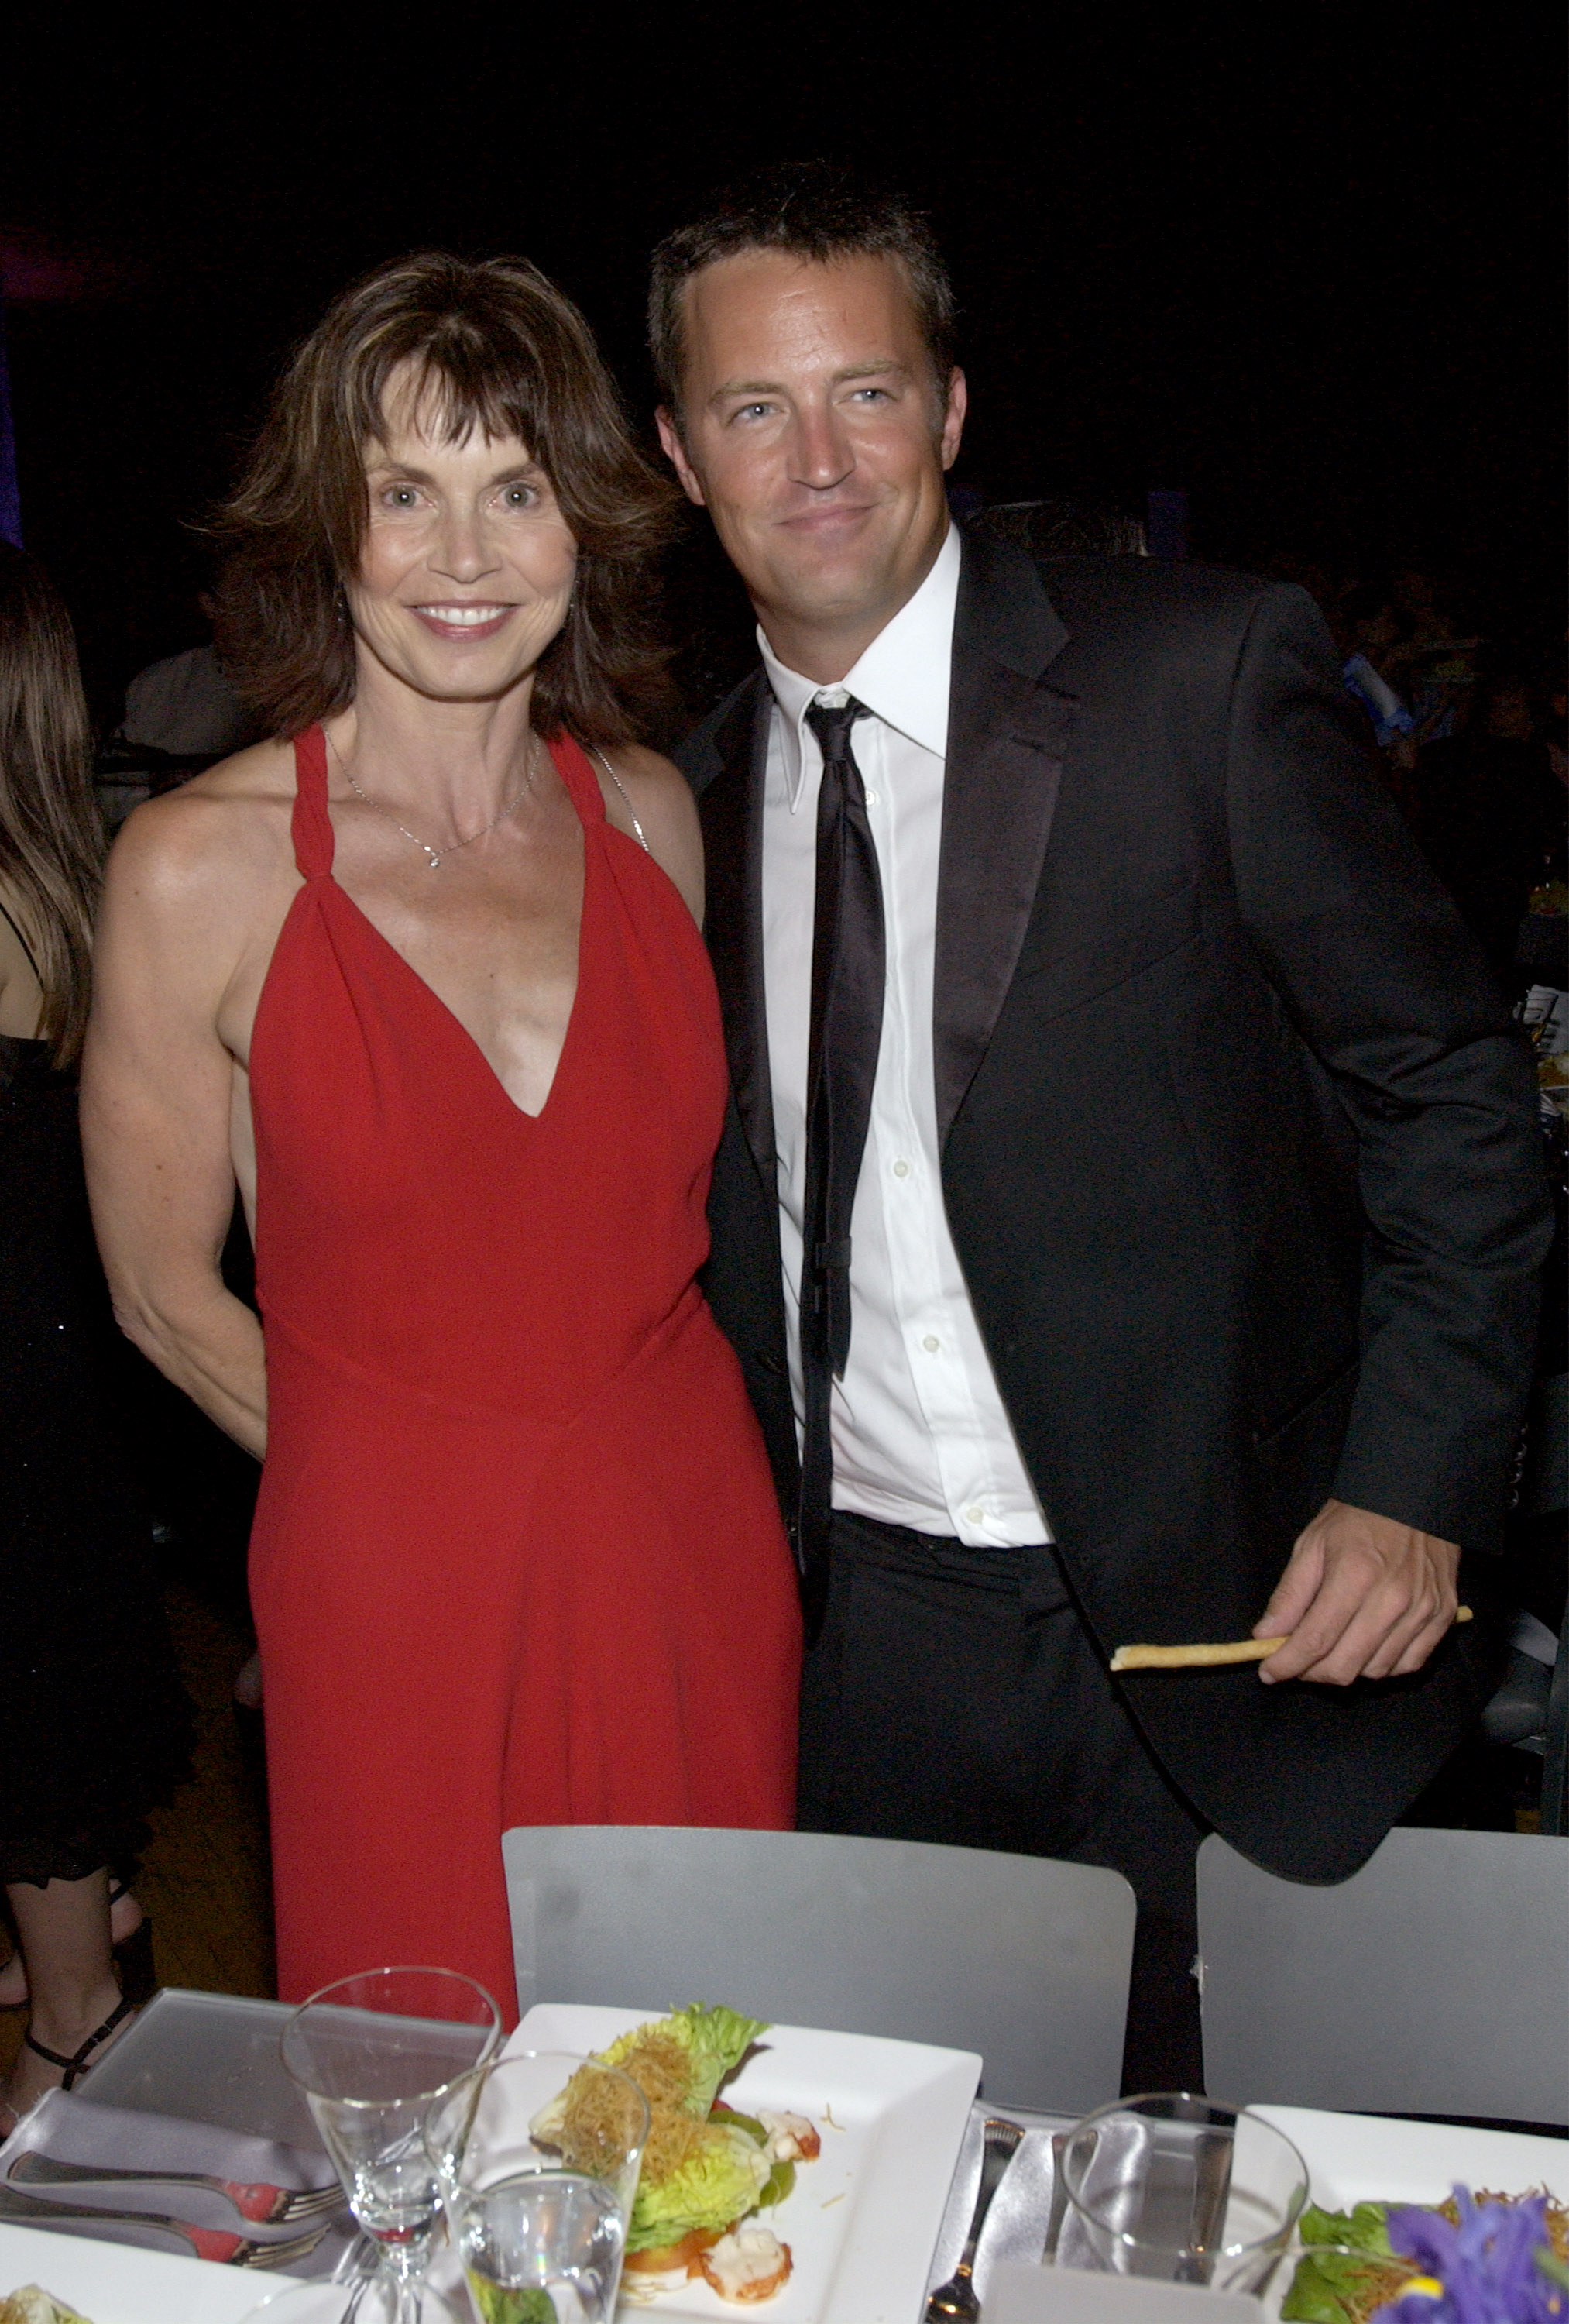 Matthew Perry and his mother Suzanne Morrison atn the Governor's Ball for the 54th Annual Primetime Emmy Awards after party on September 22, 2002, in Los Angeles, California. | Source: Getty Images